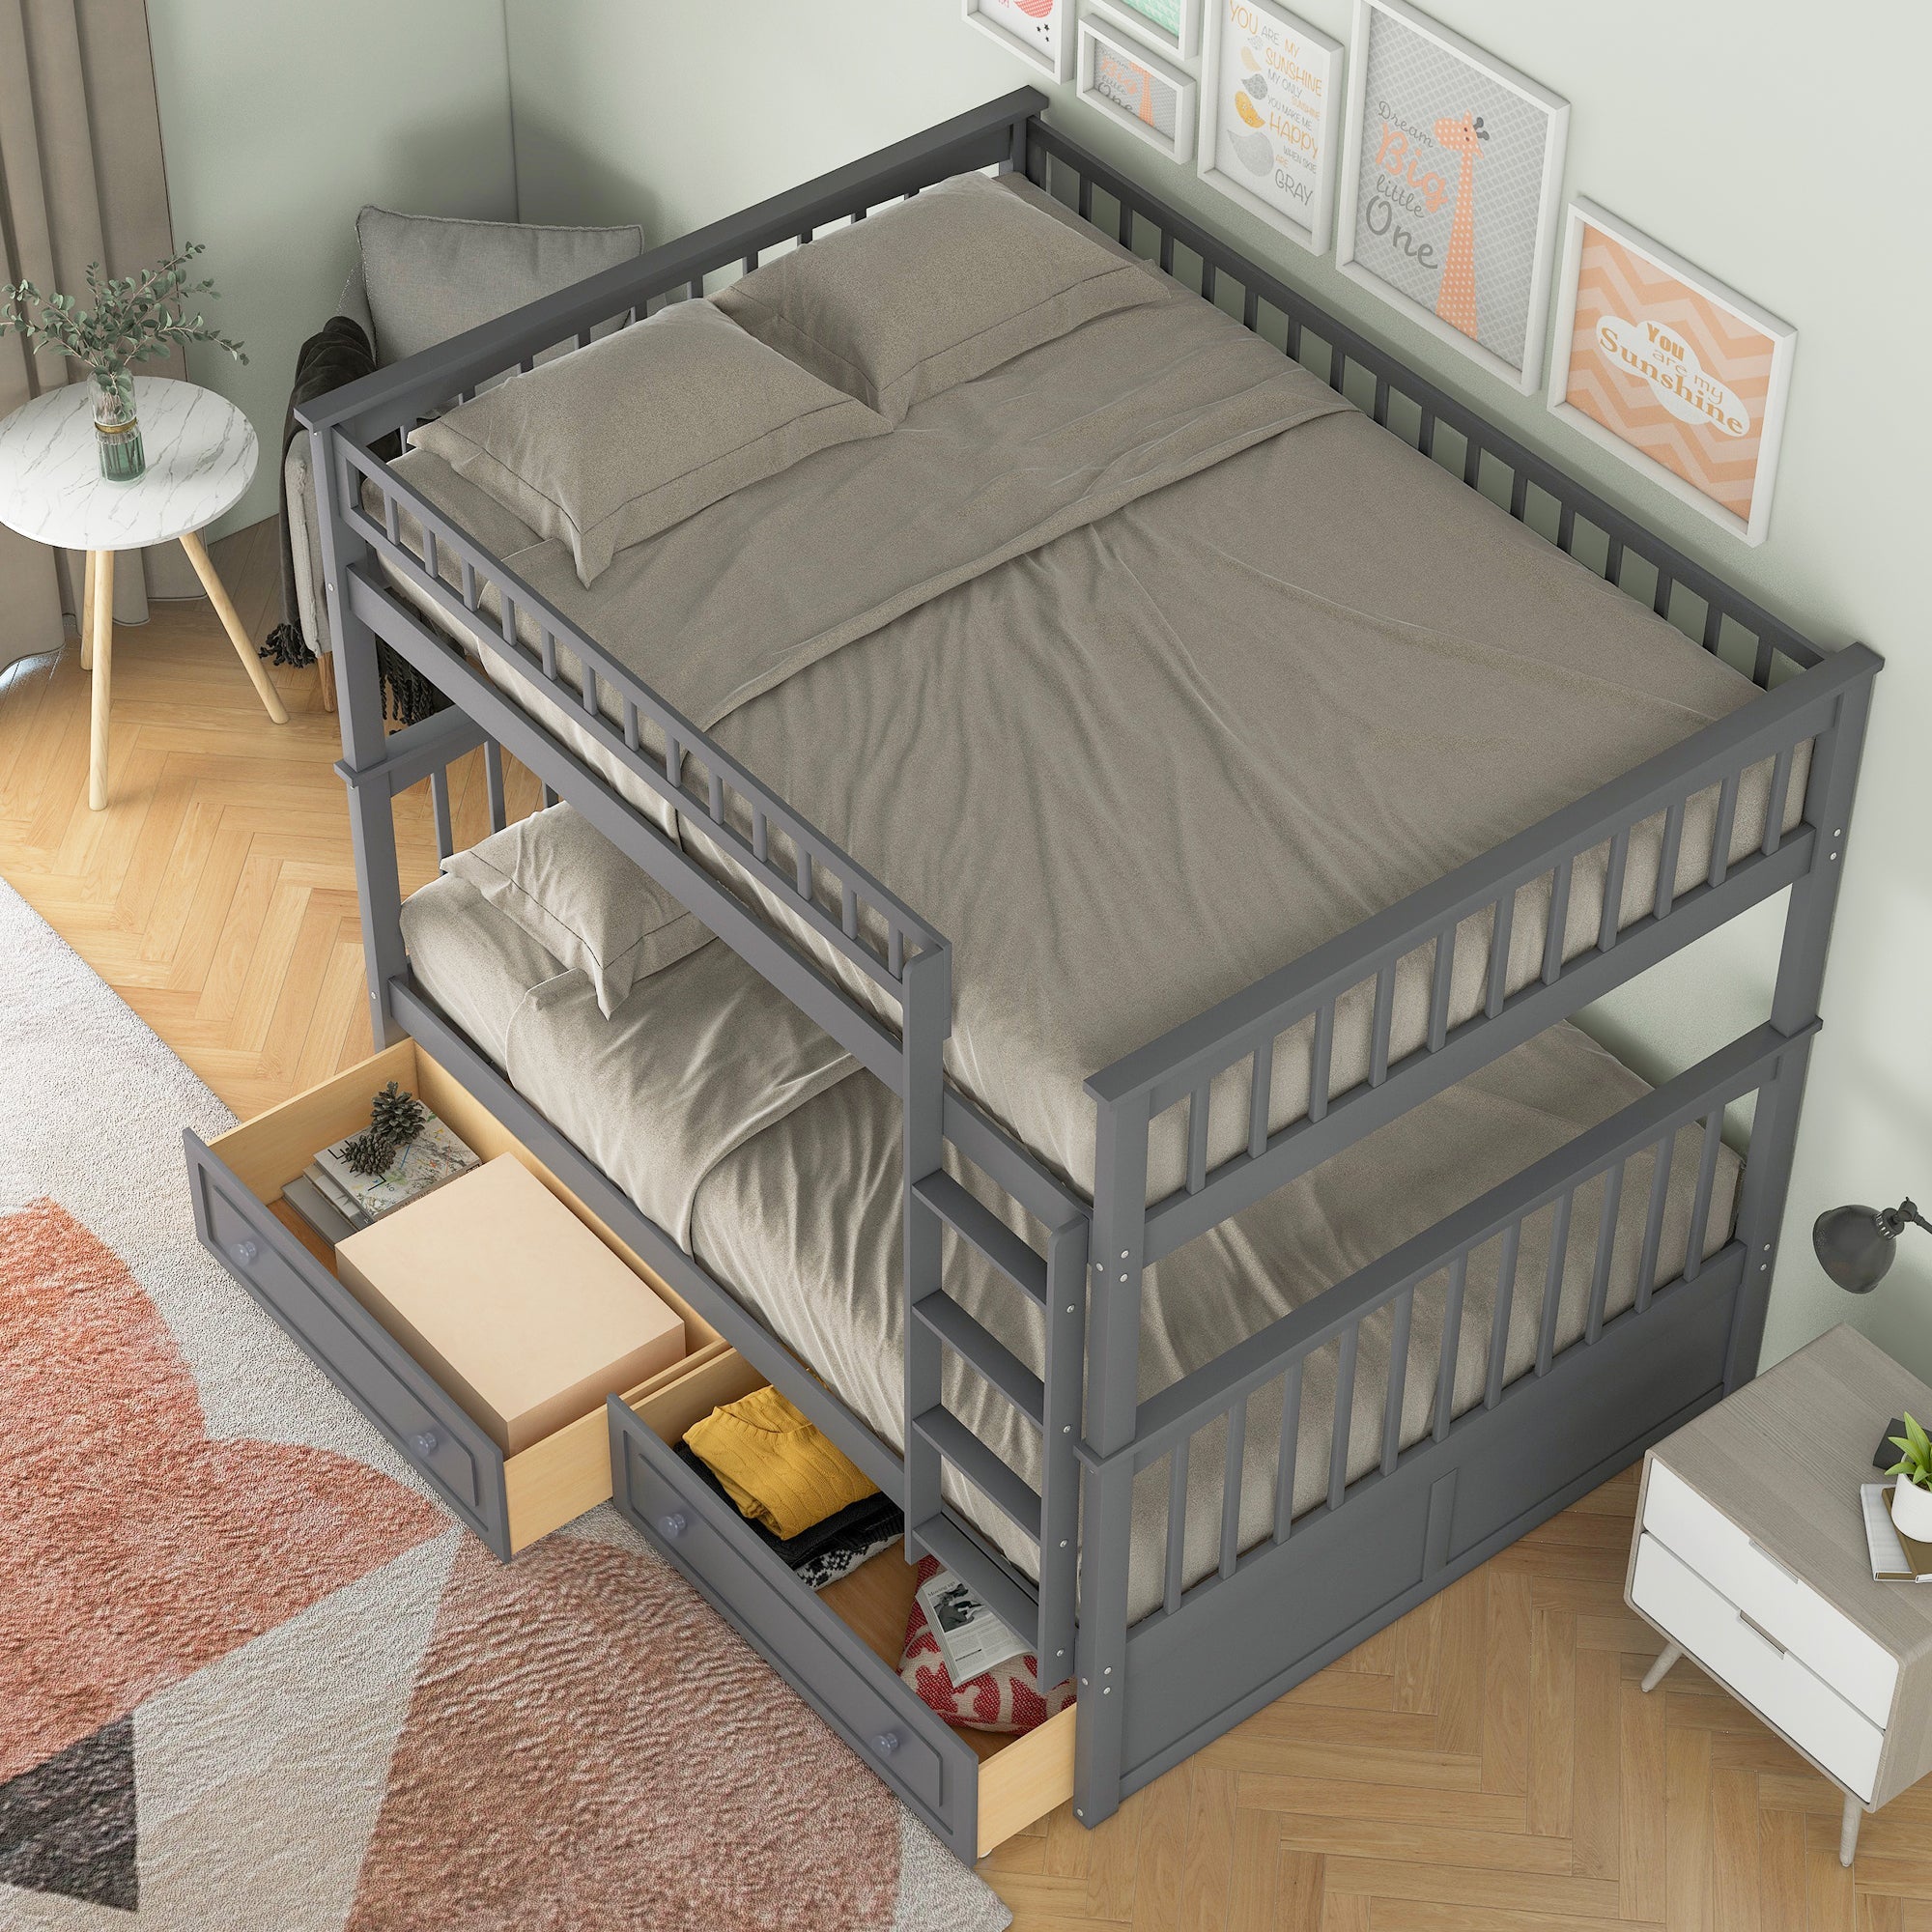 Euroco Pine Wood Bunk Bed With Storage, Full-Over-Full, Grey